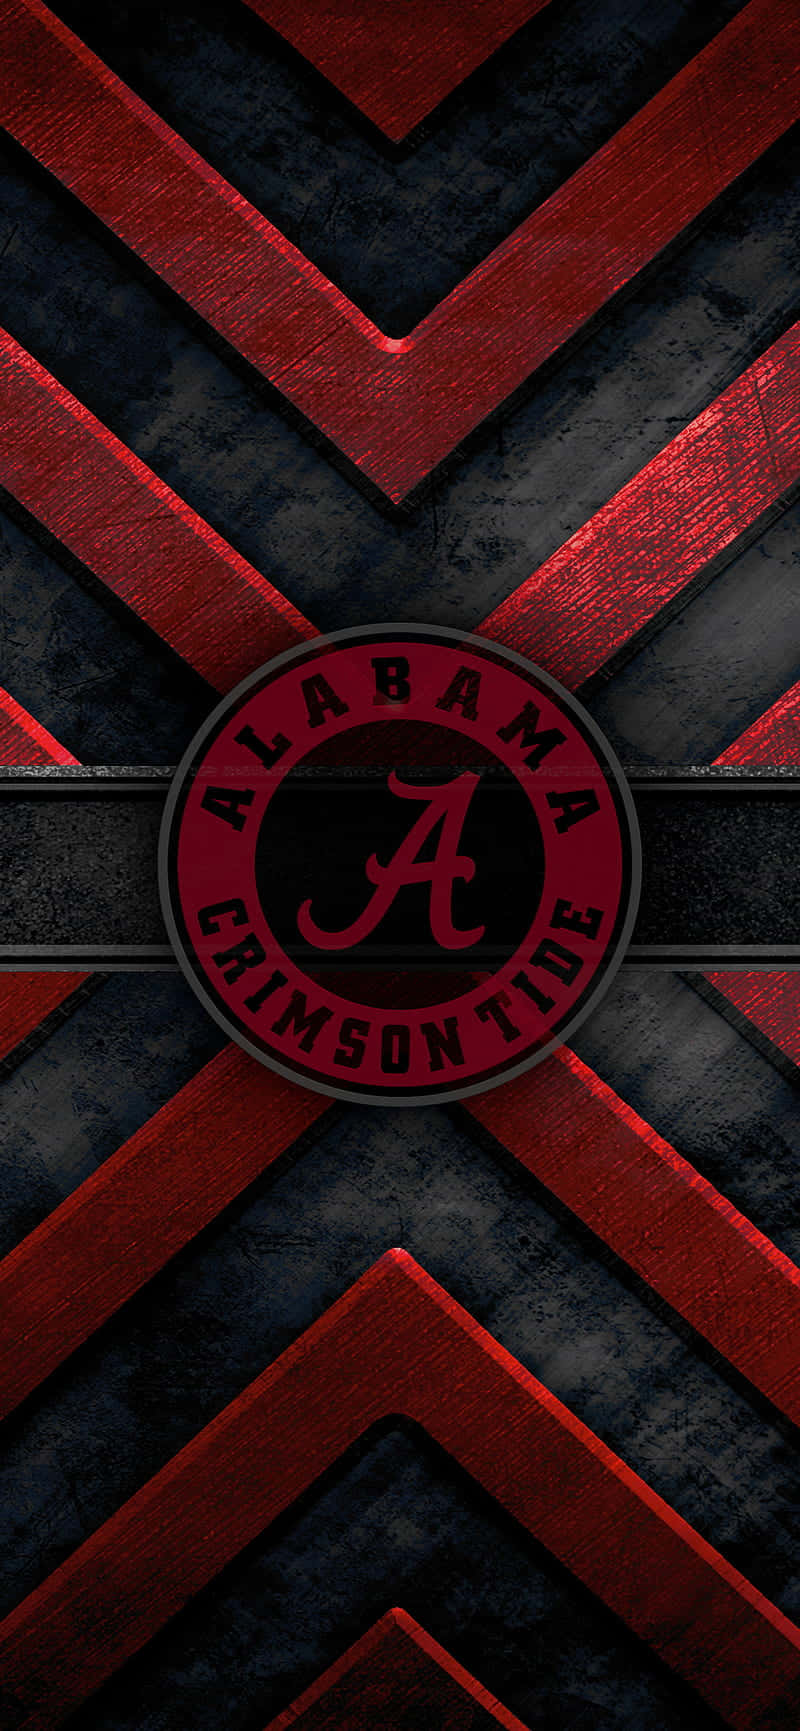 Get Ready For Alabama Football With This Super-Cool iPhone Skin Wallpaper